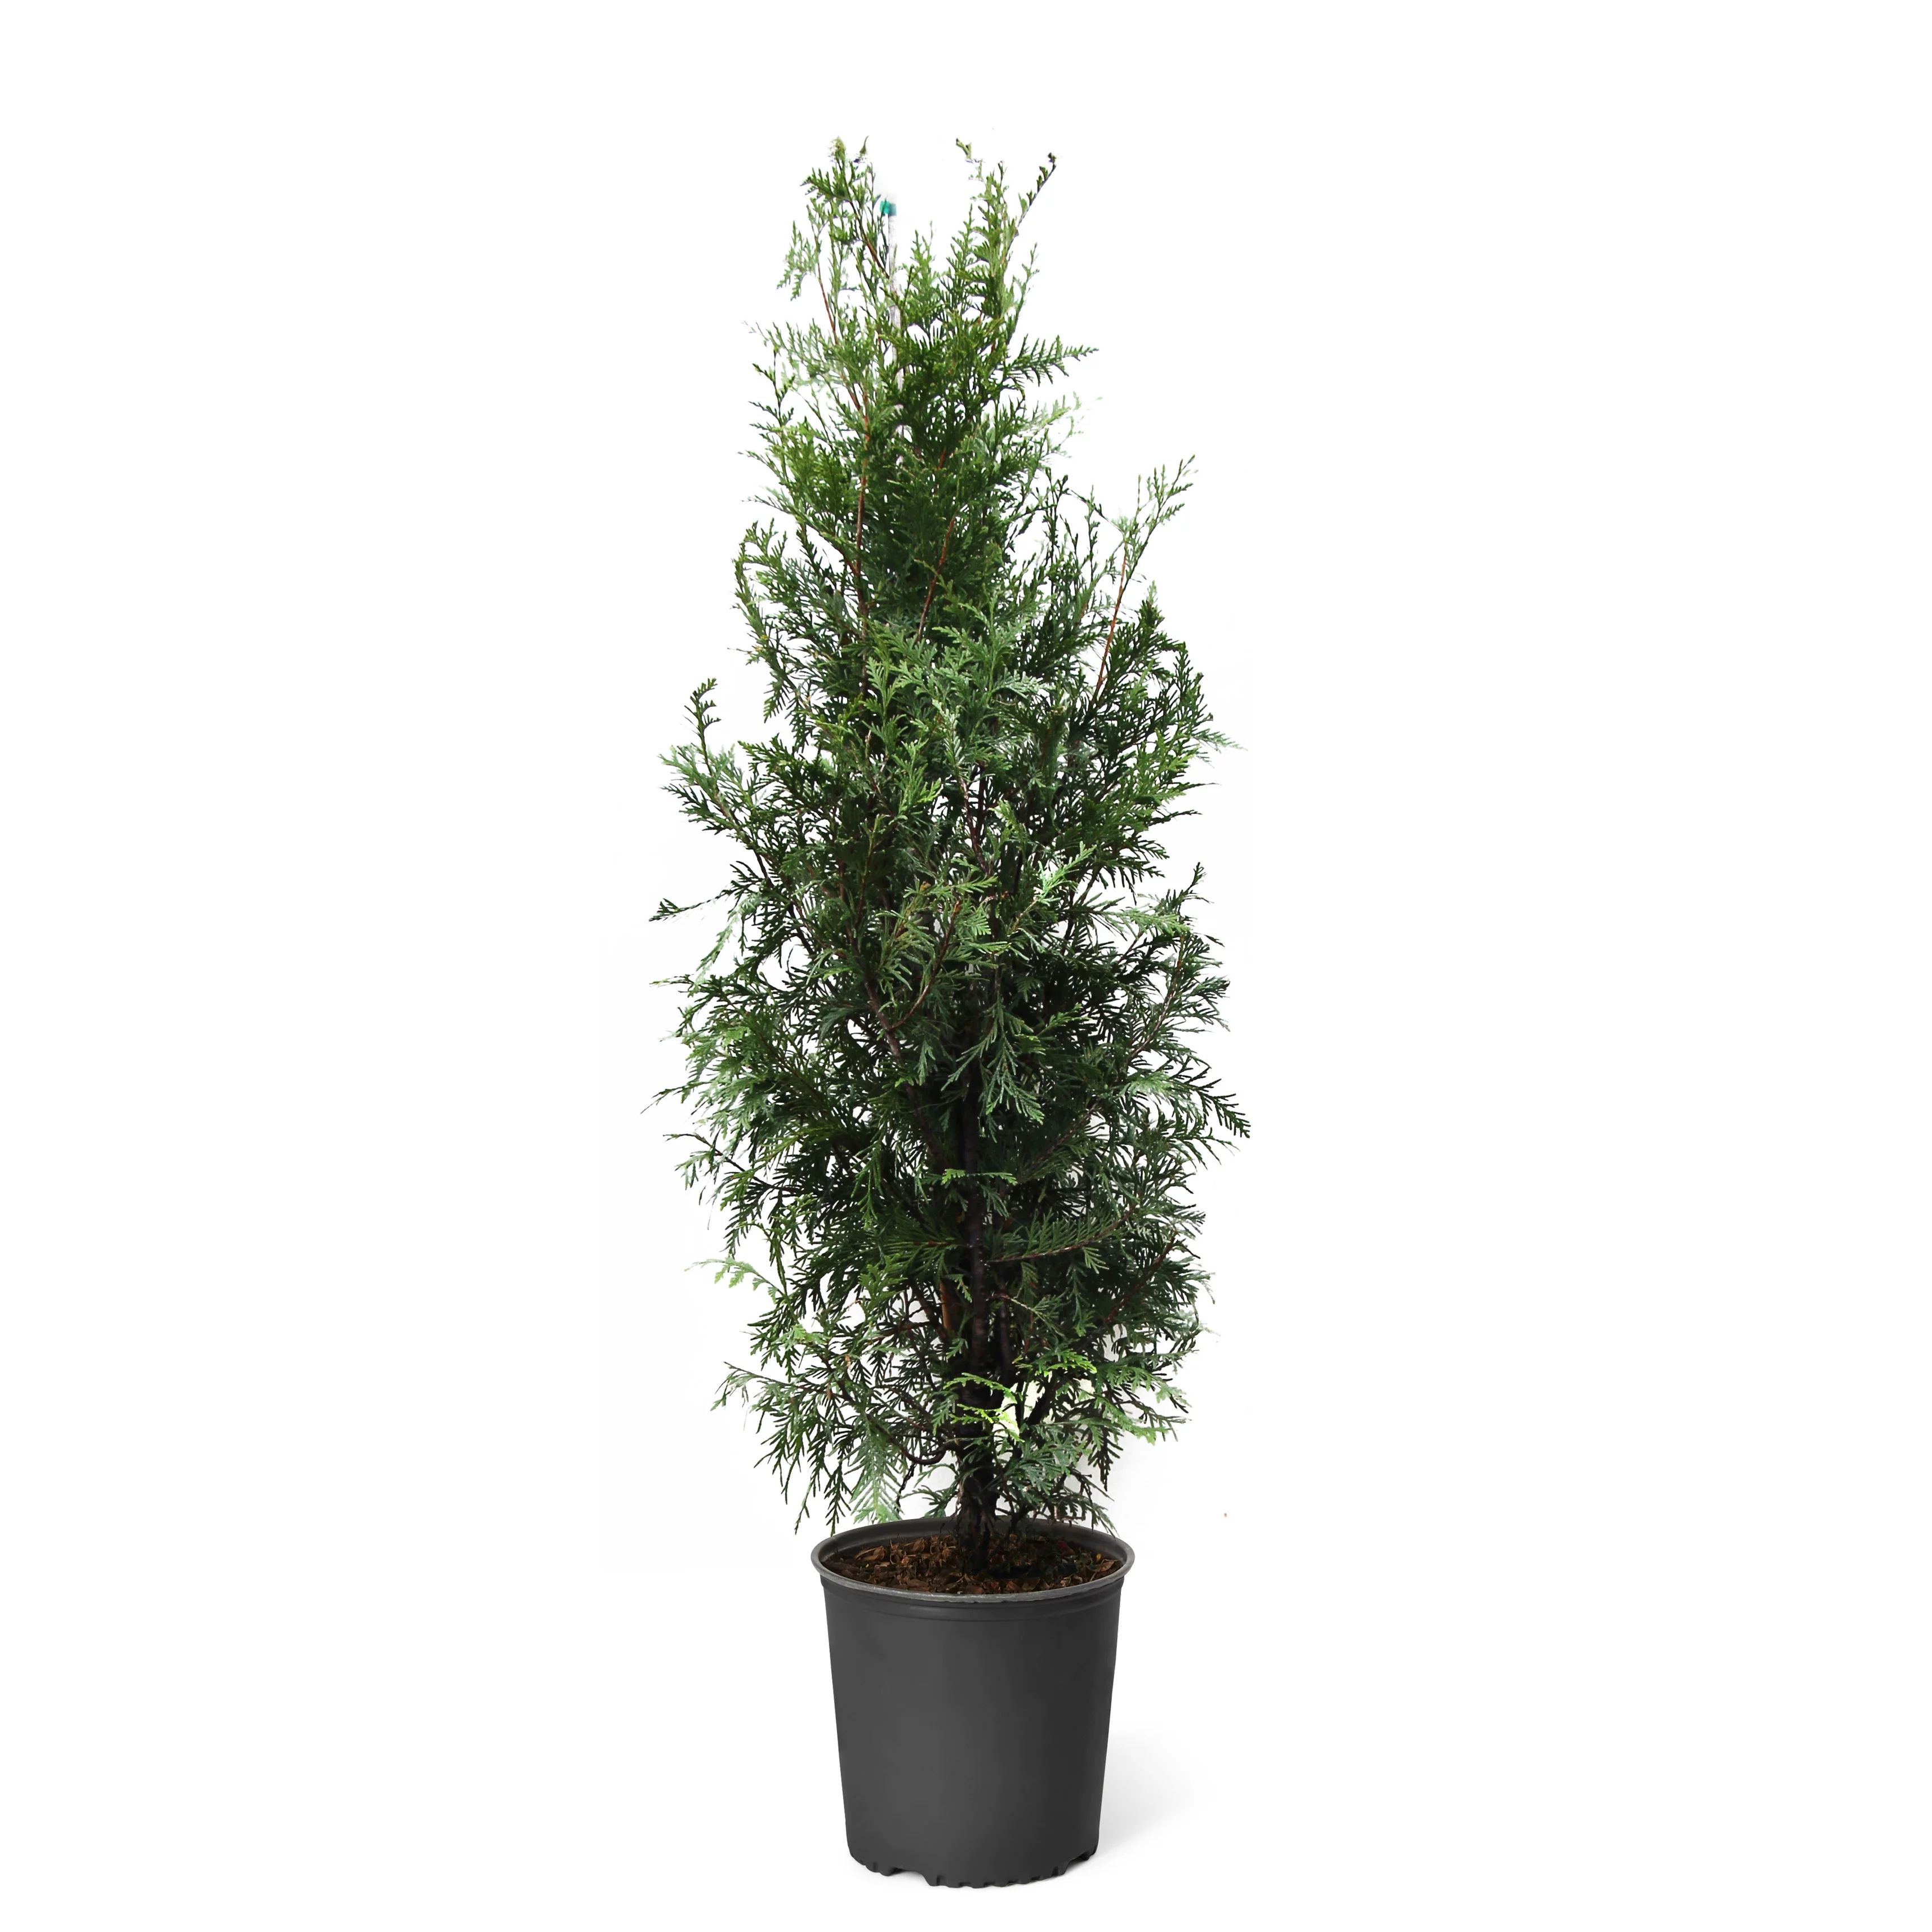 Thuja Green Giant Tree - Fast Growing Evergreen Privacy Trees - Cannot Ship to AZ | Walmart (US)